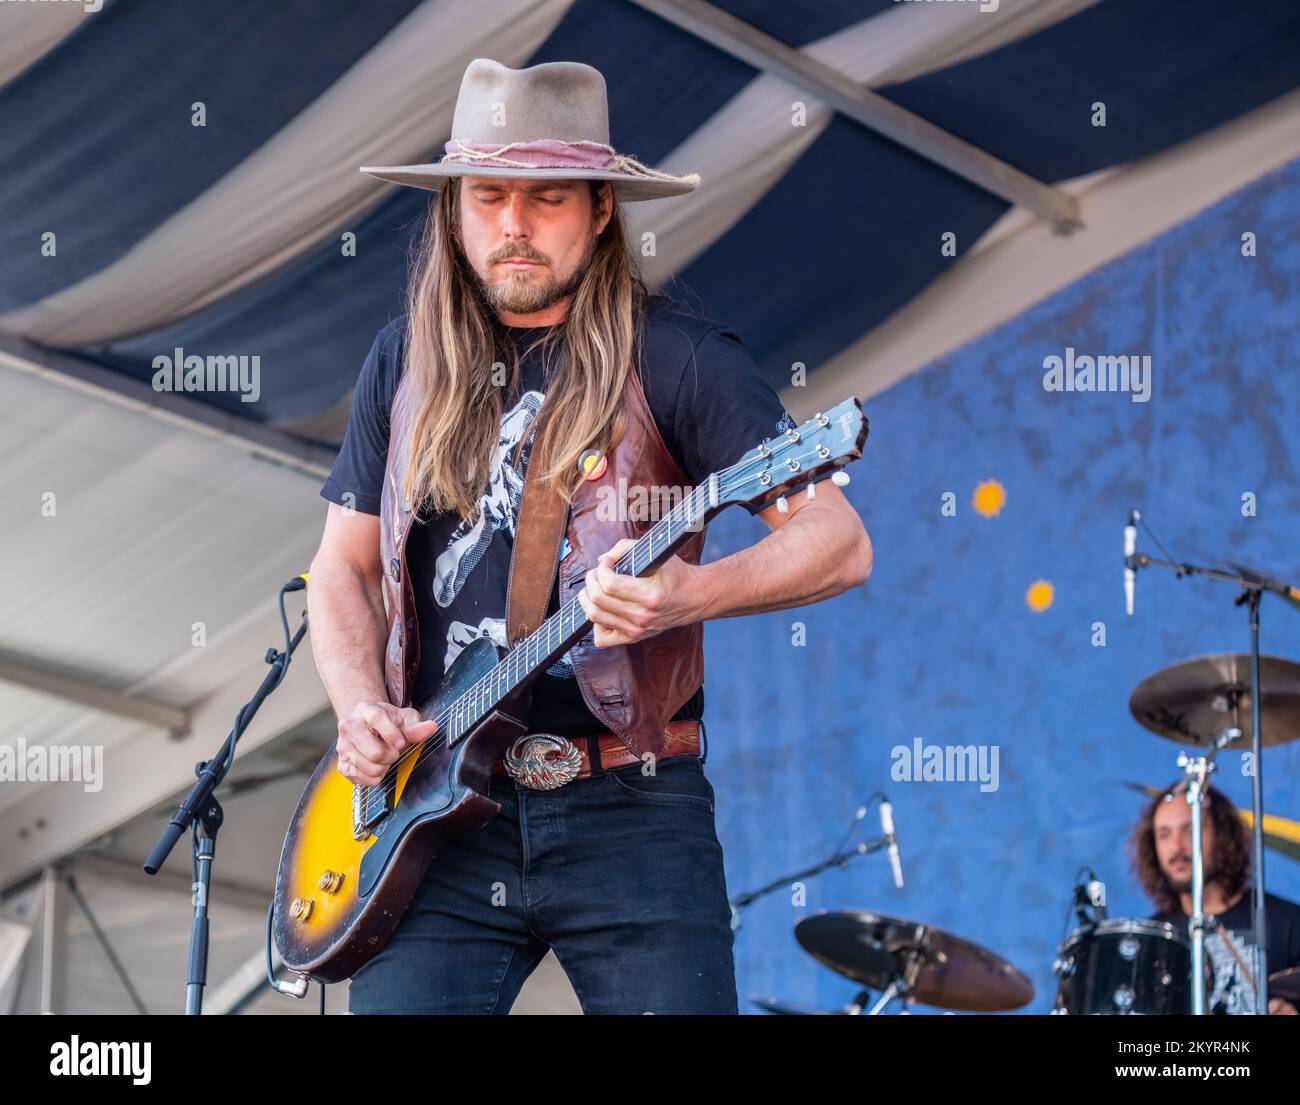 NEW ORLEANS, LA, USA - 27 aprile 2018: Lukas Nelson suona con la sua band Promise of the Real al New Orleans Jazz and Heritage Festival 2018 Foto Stock